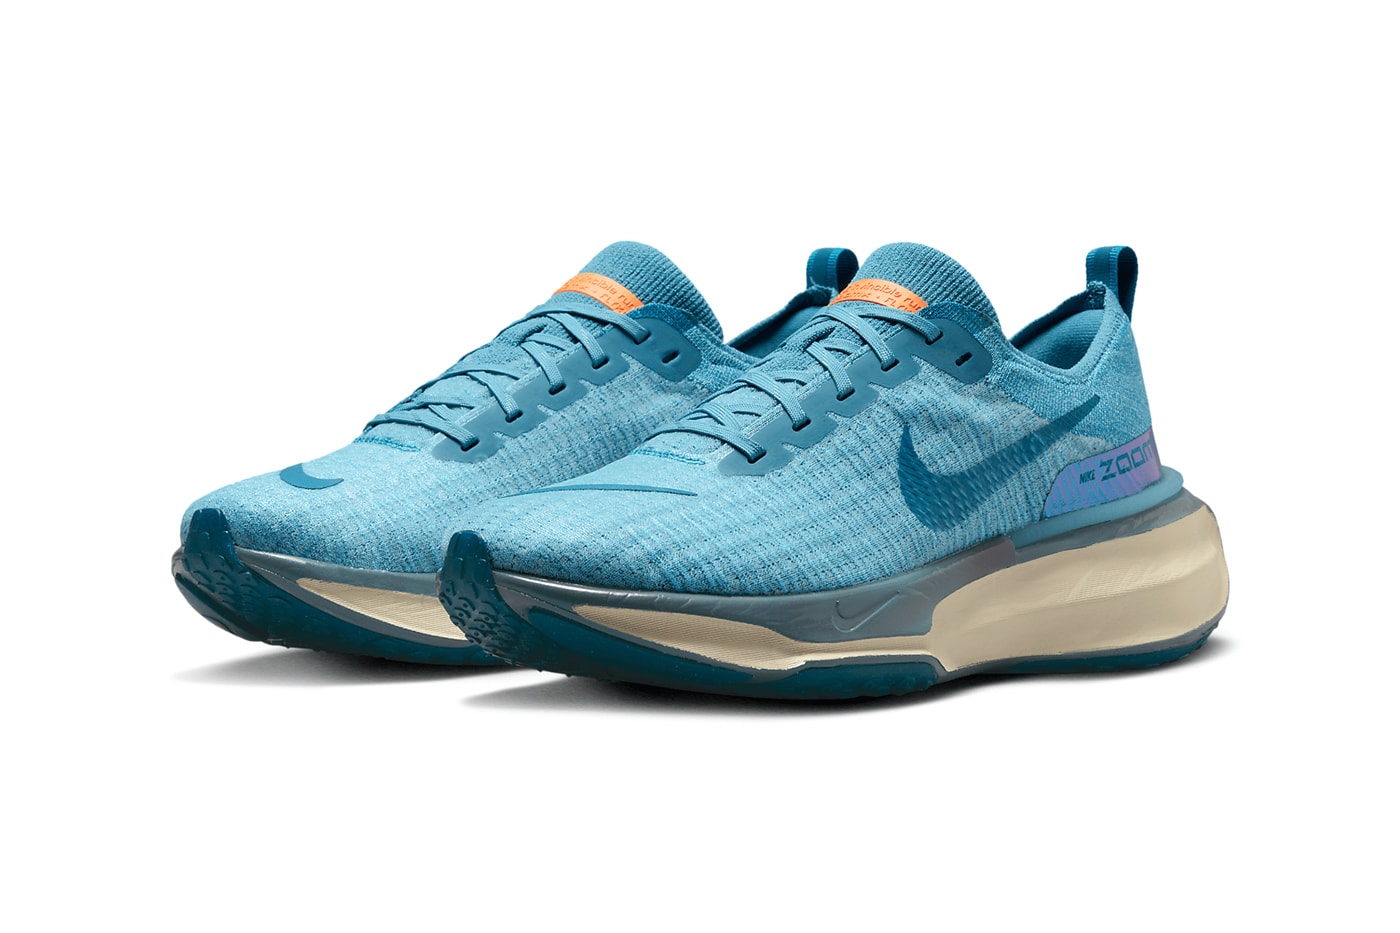 Nike ZoomX Invincible 3 best running shoes right now